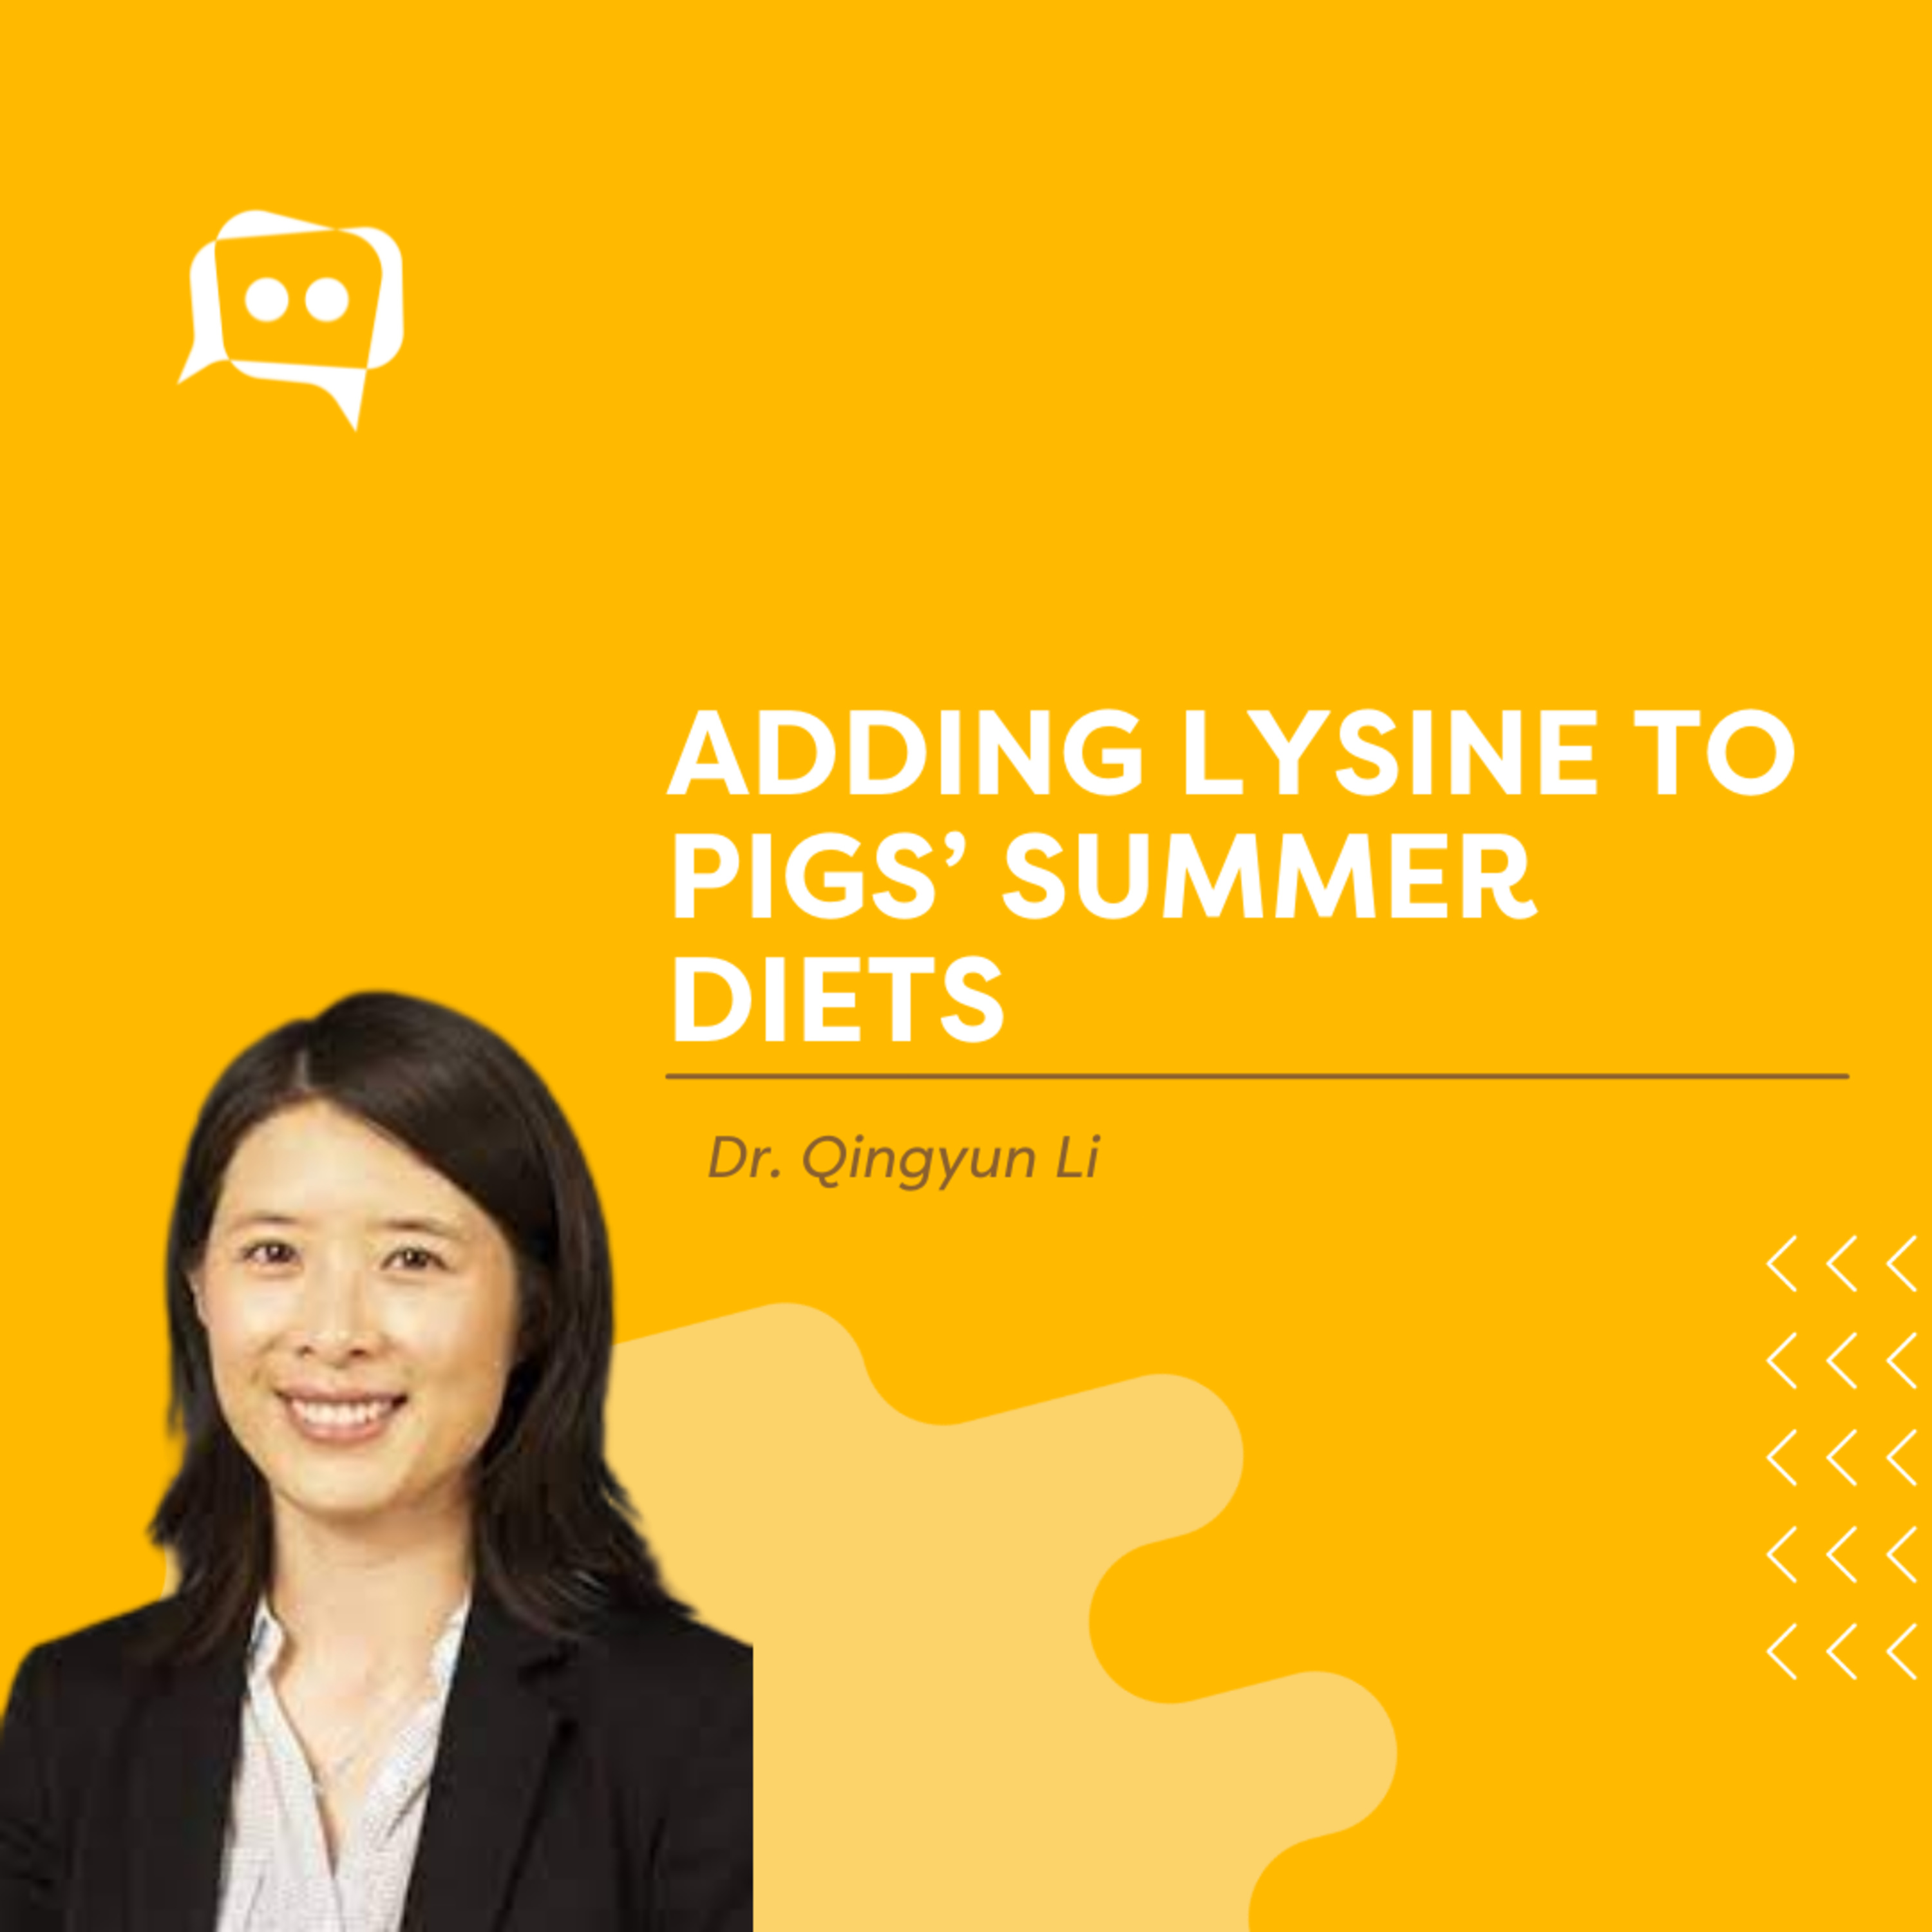 #SHORTS: Adding lysine to pigs’ summer diets, with Dr. Qingyun Li